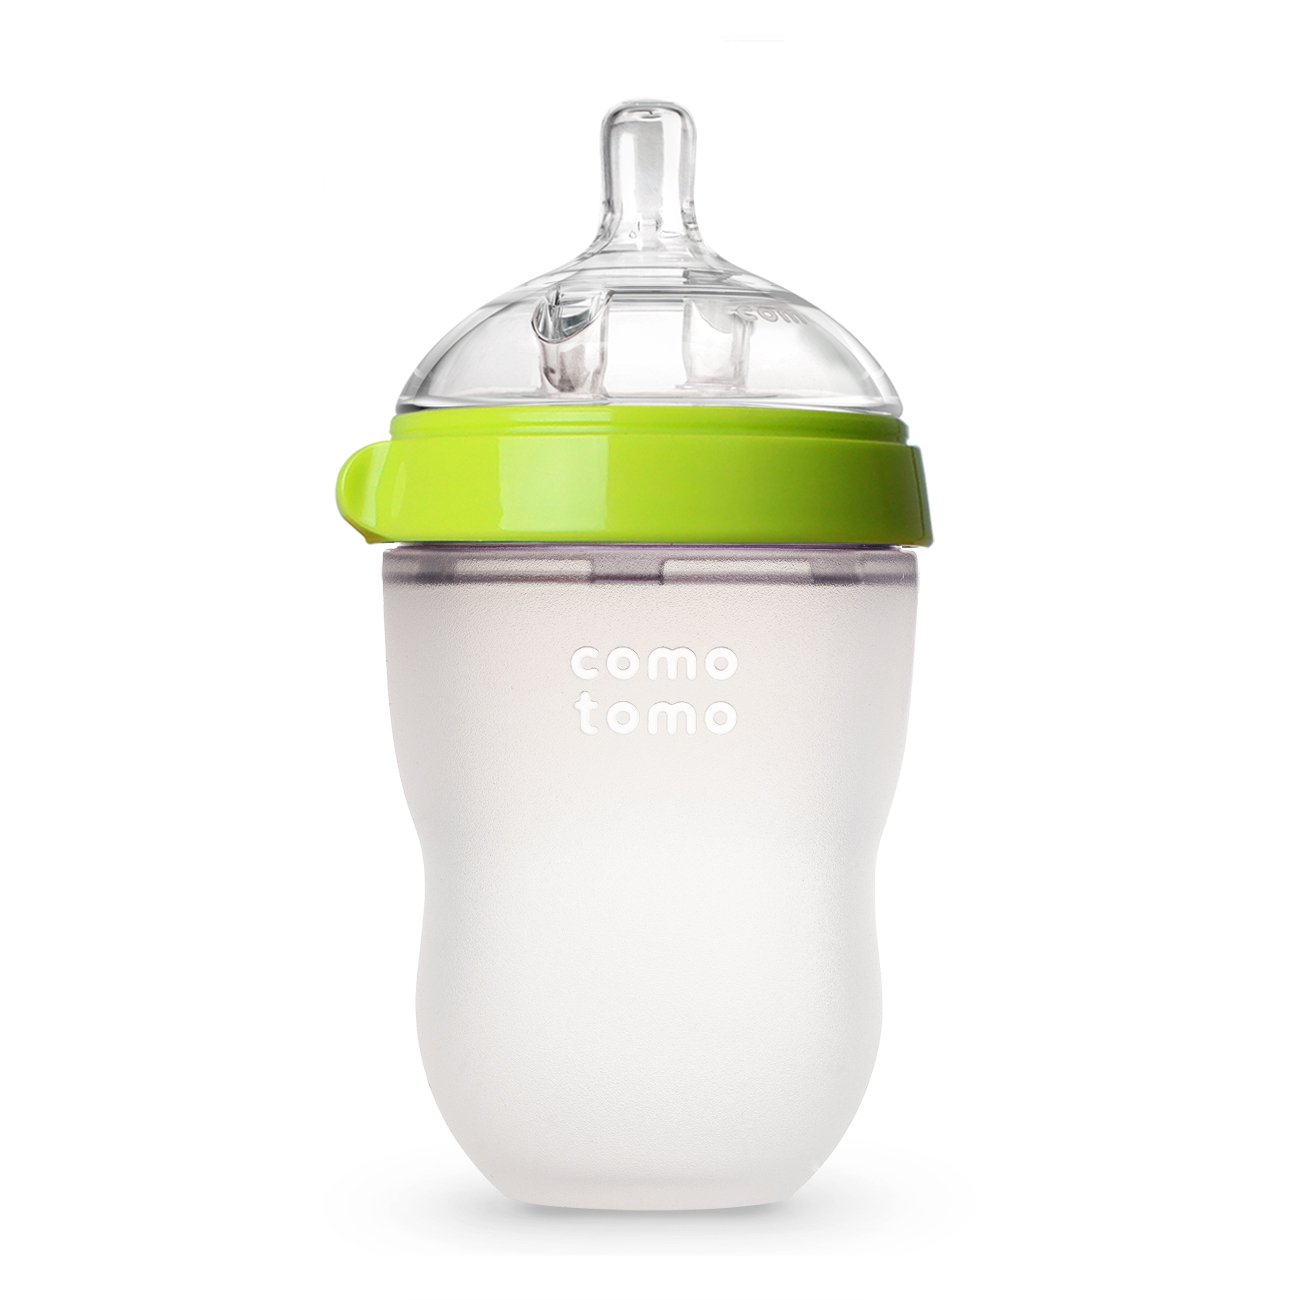 Top 4 Best Natural Baby Bottles Reviews in 2022 1